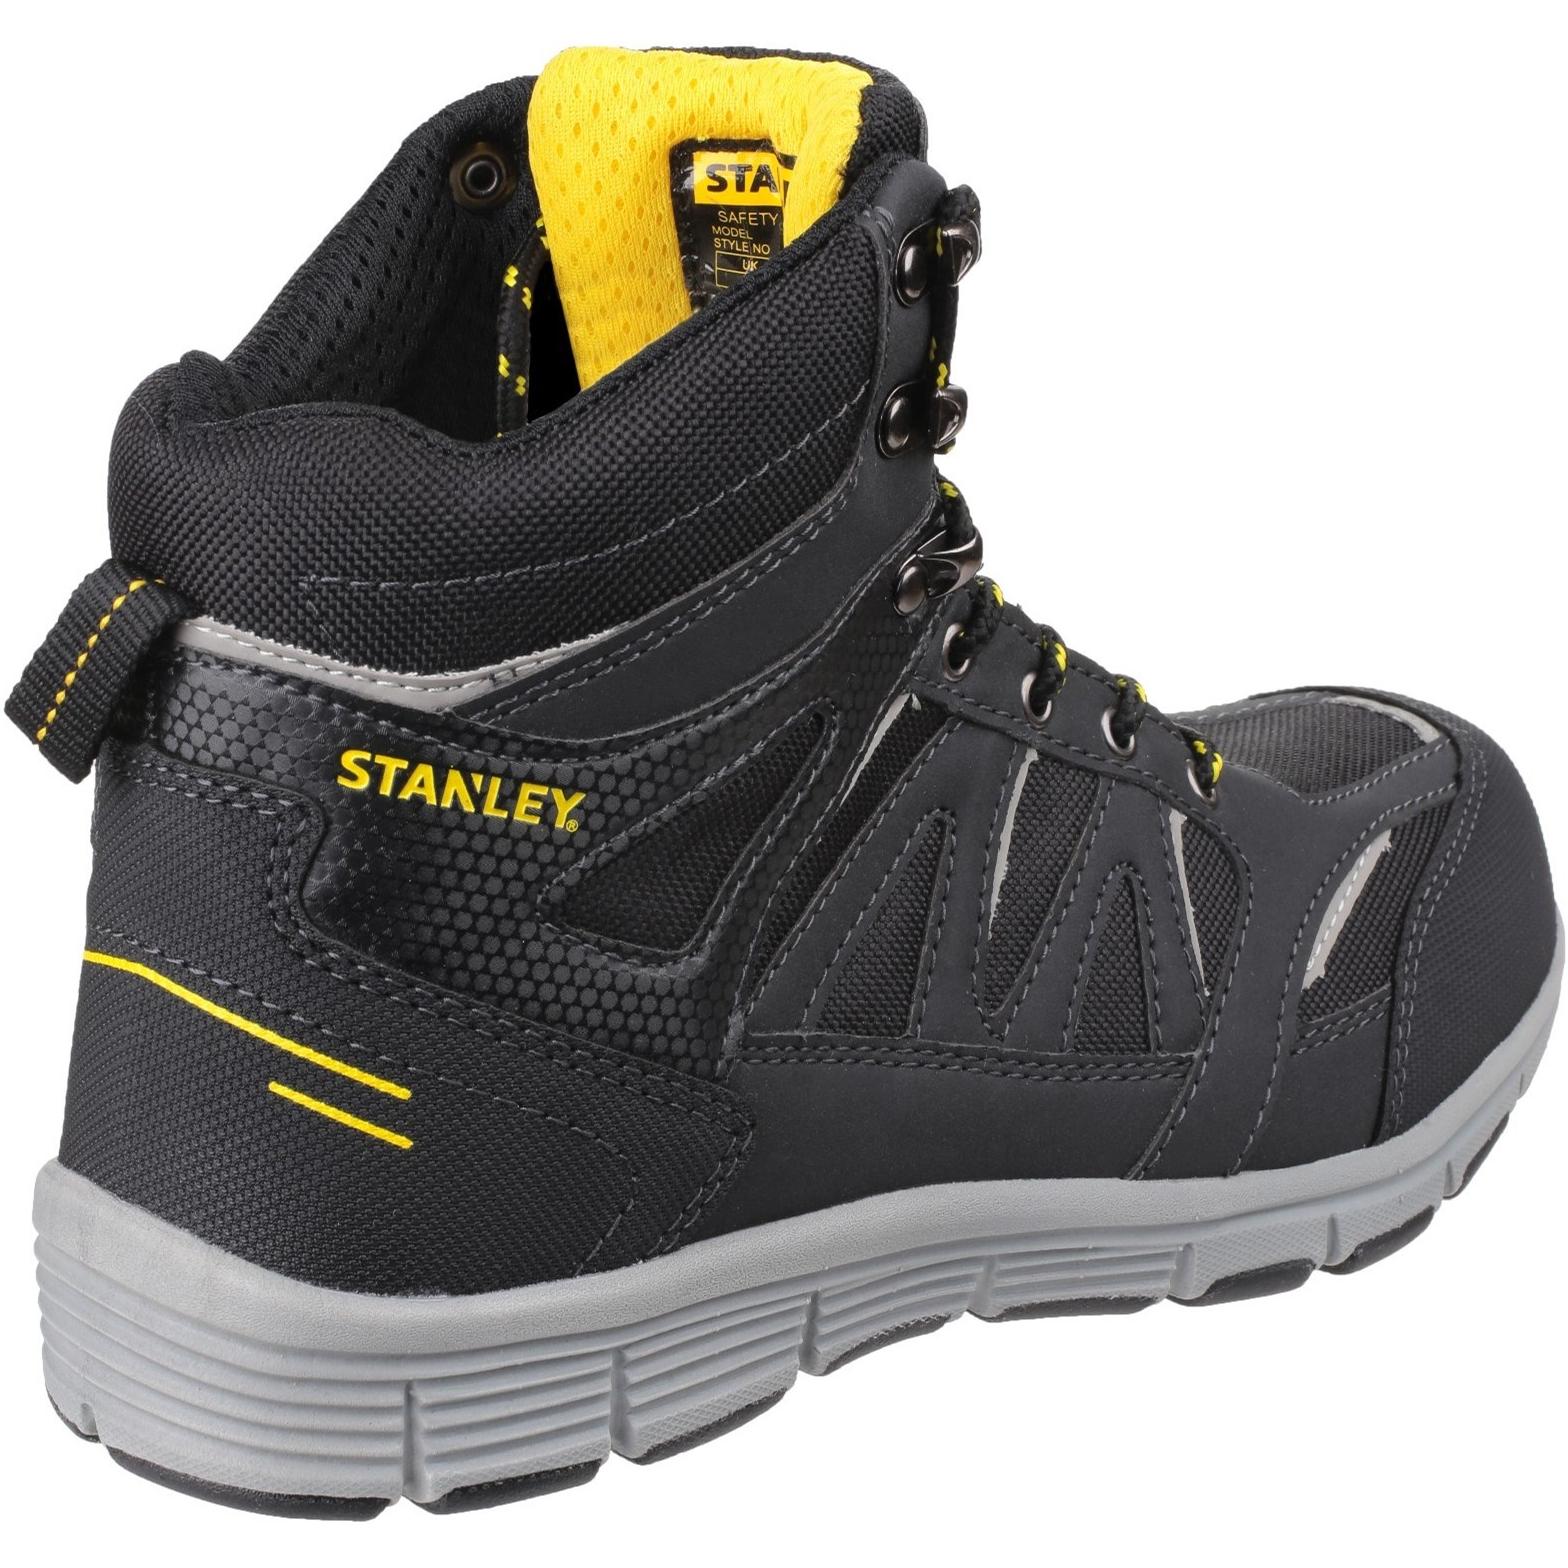 Stanley Pulse Black S1 P Sports Safety Boot